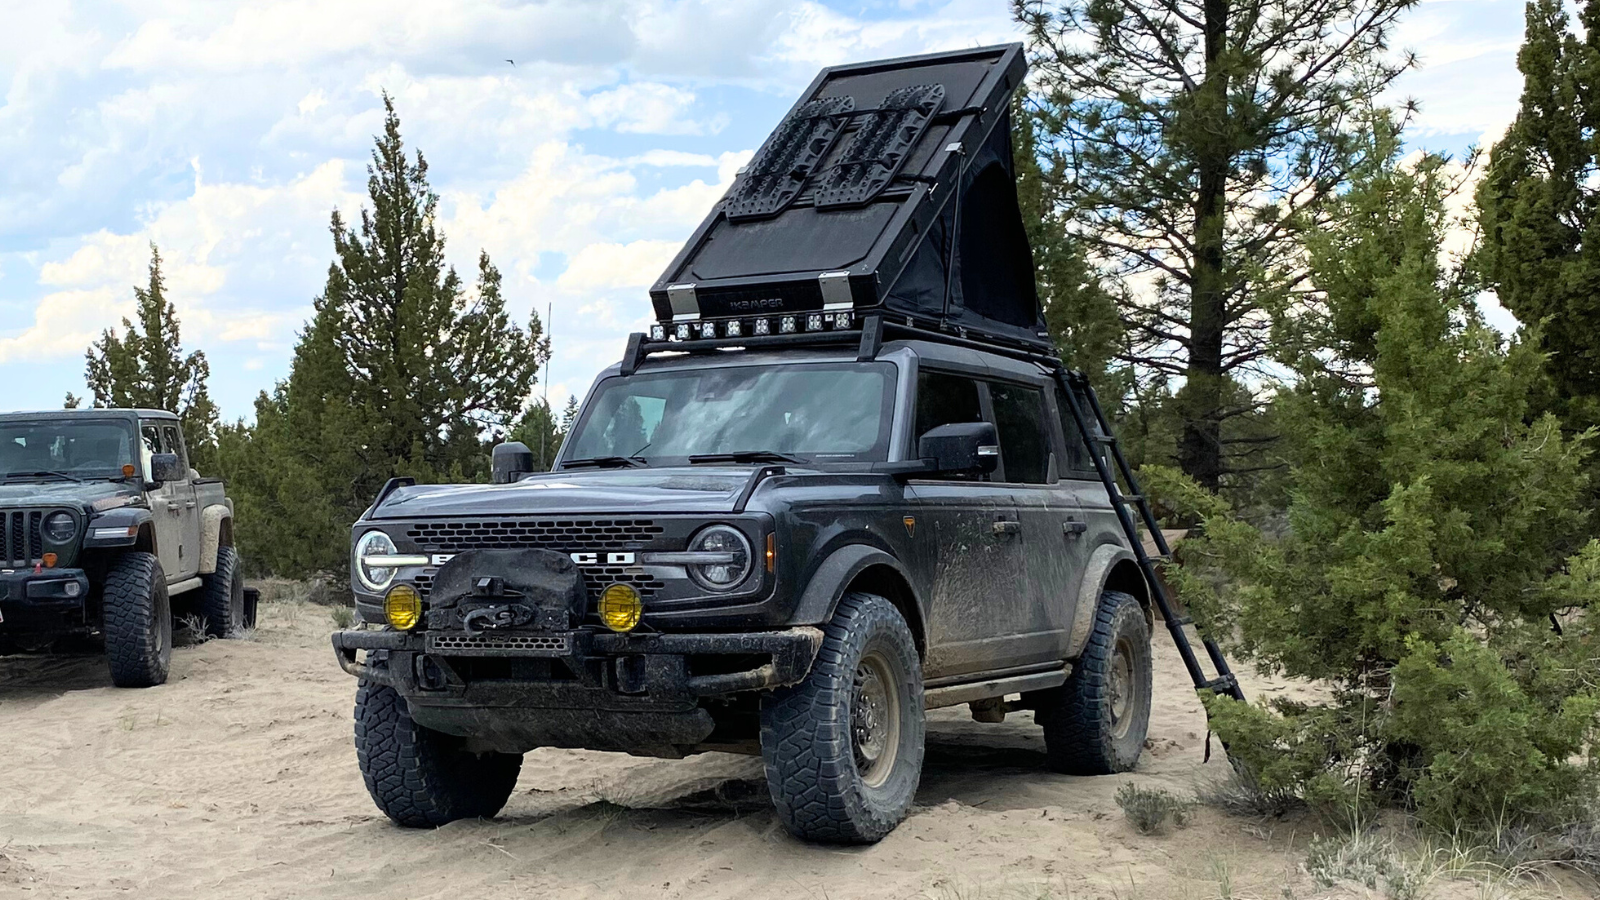 Ford Bronco Let's see your roof-top Tents and camping setups! Untitled desi